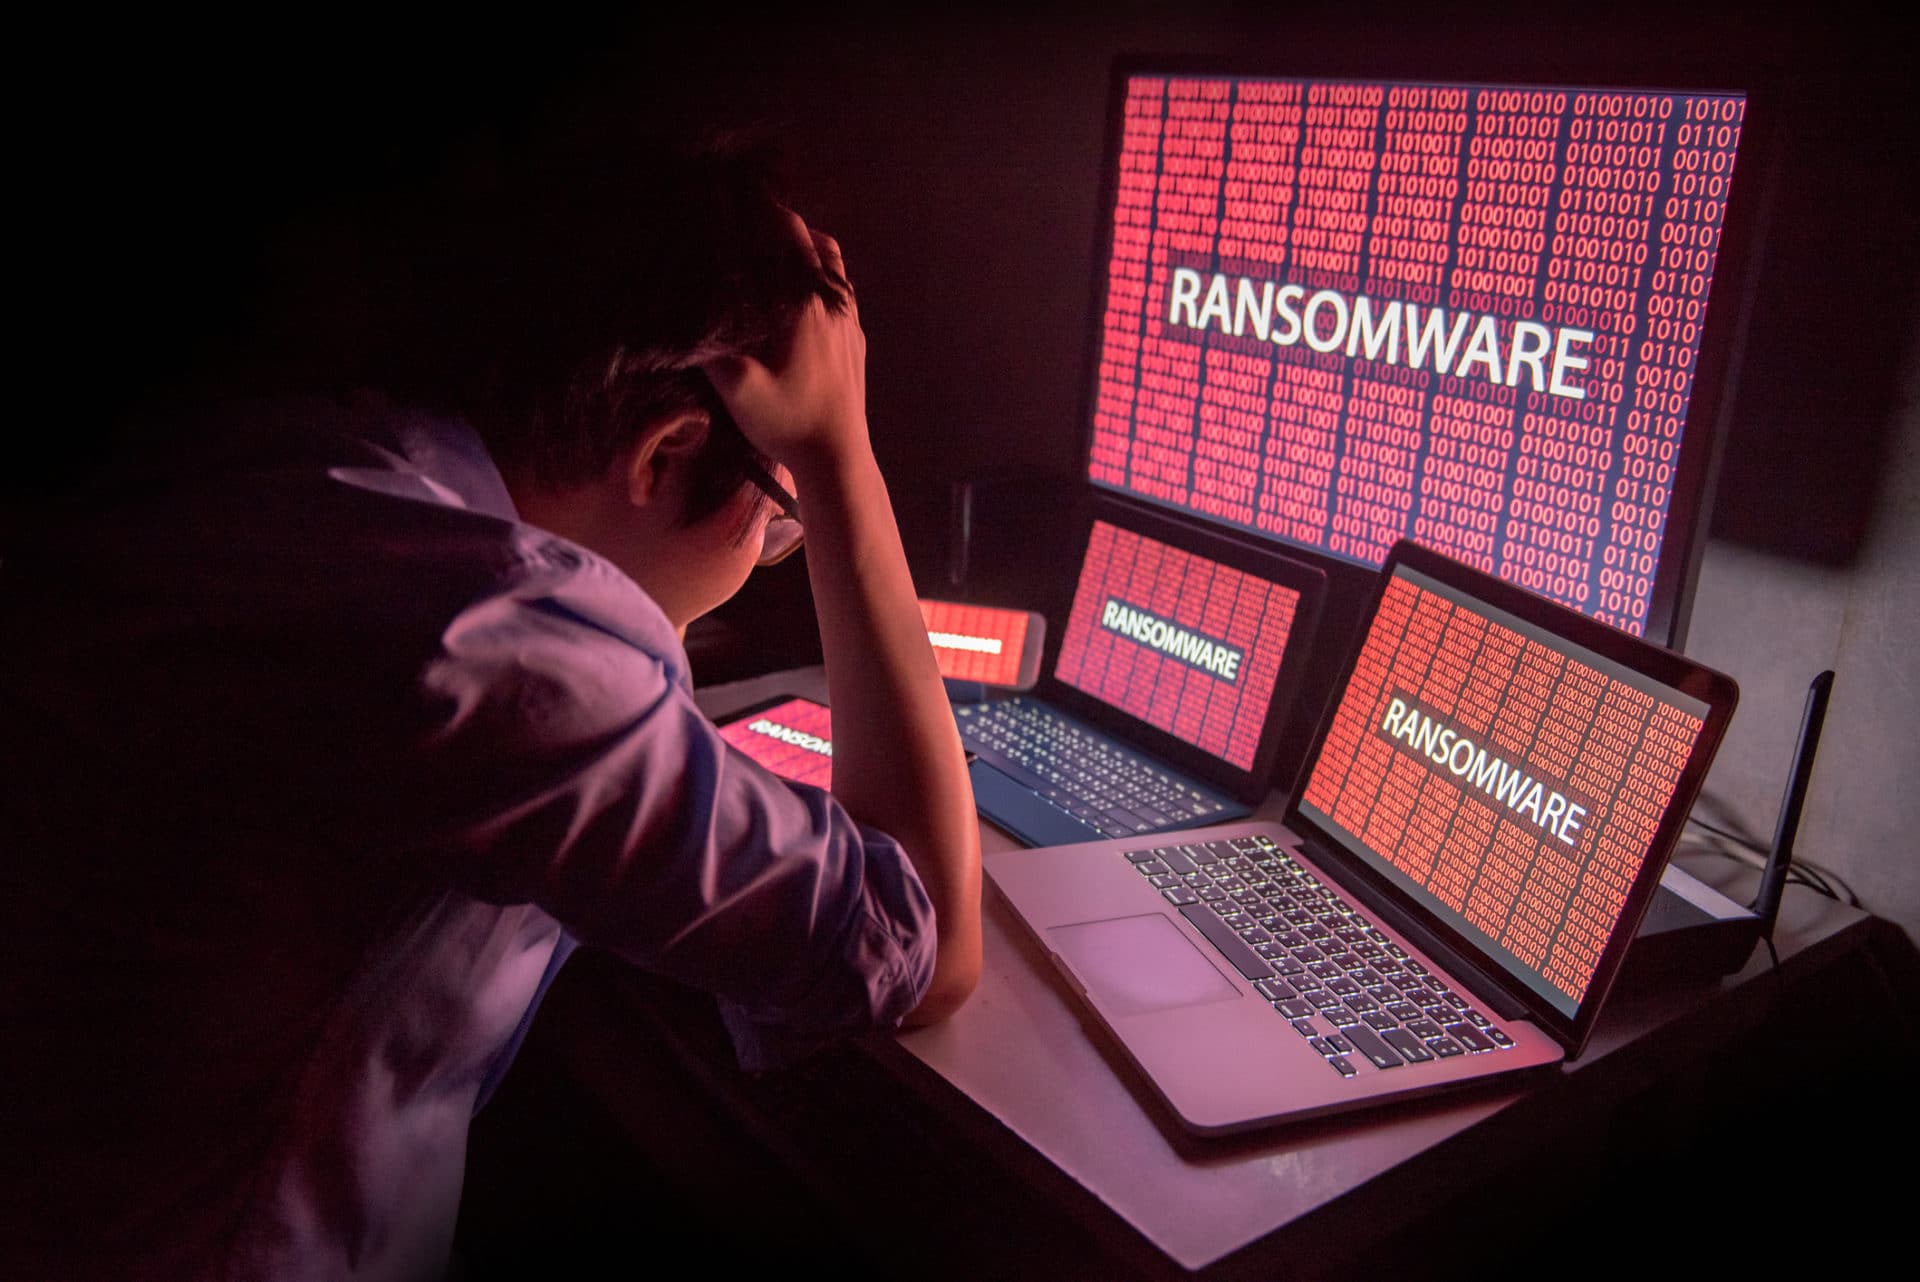 Businessperson In Nashville Attacked With Ransomware